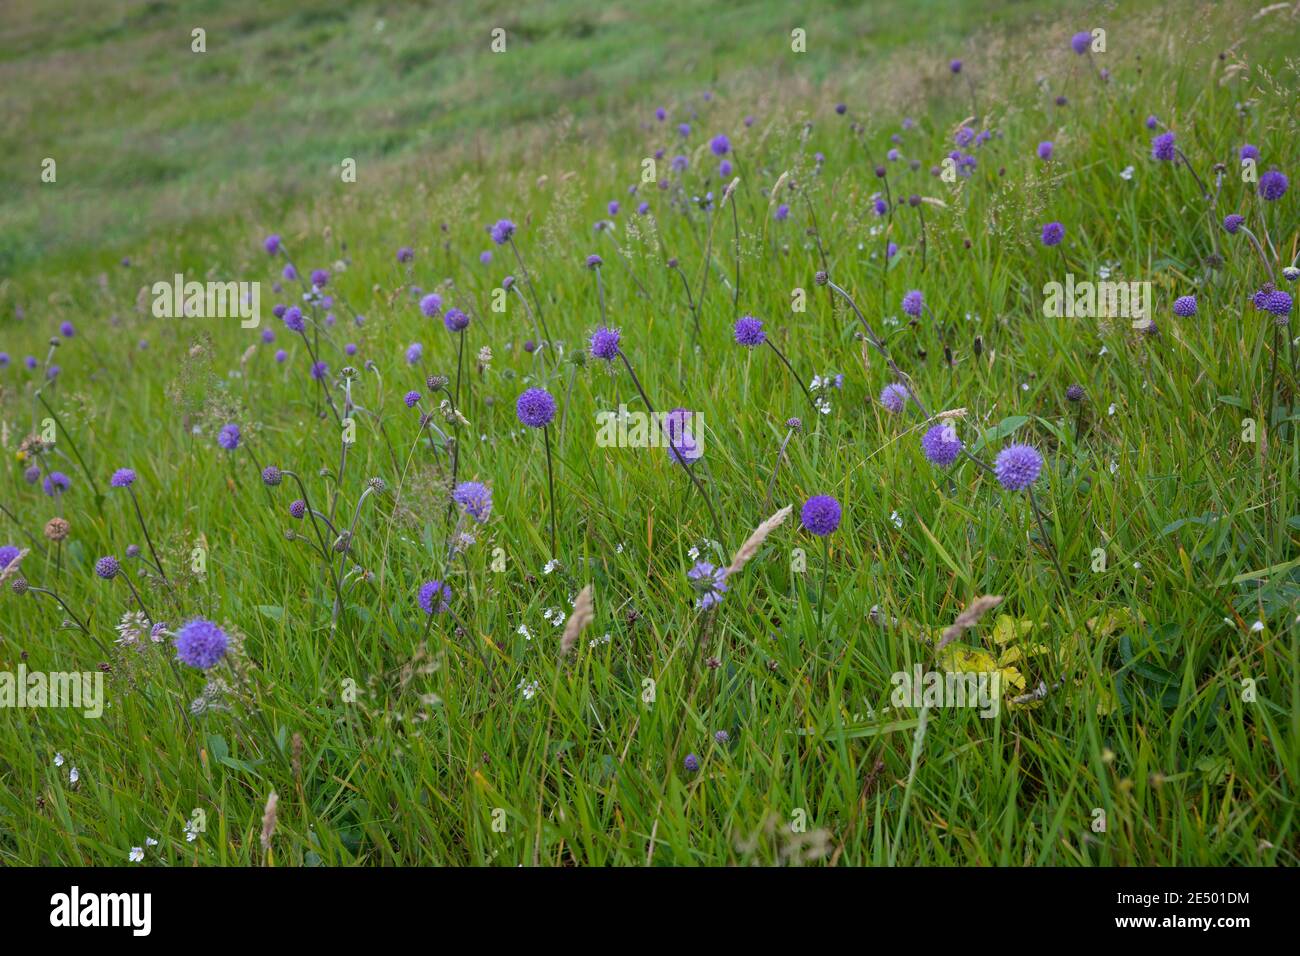 Skabiose High Resolution Stock Photography and Images - Alamy